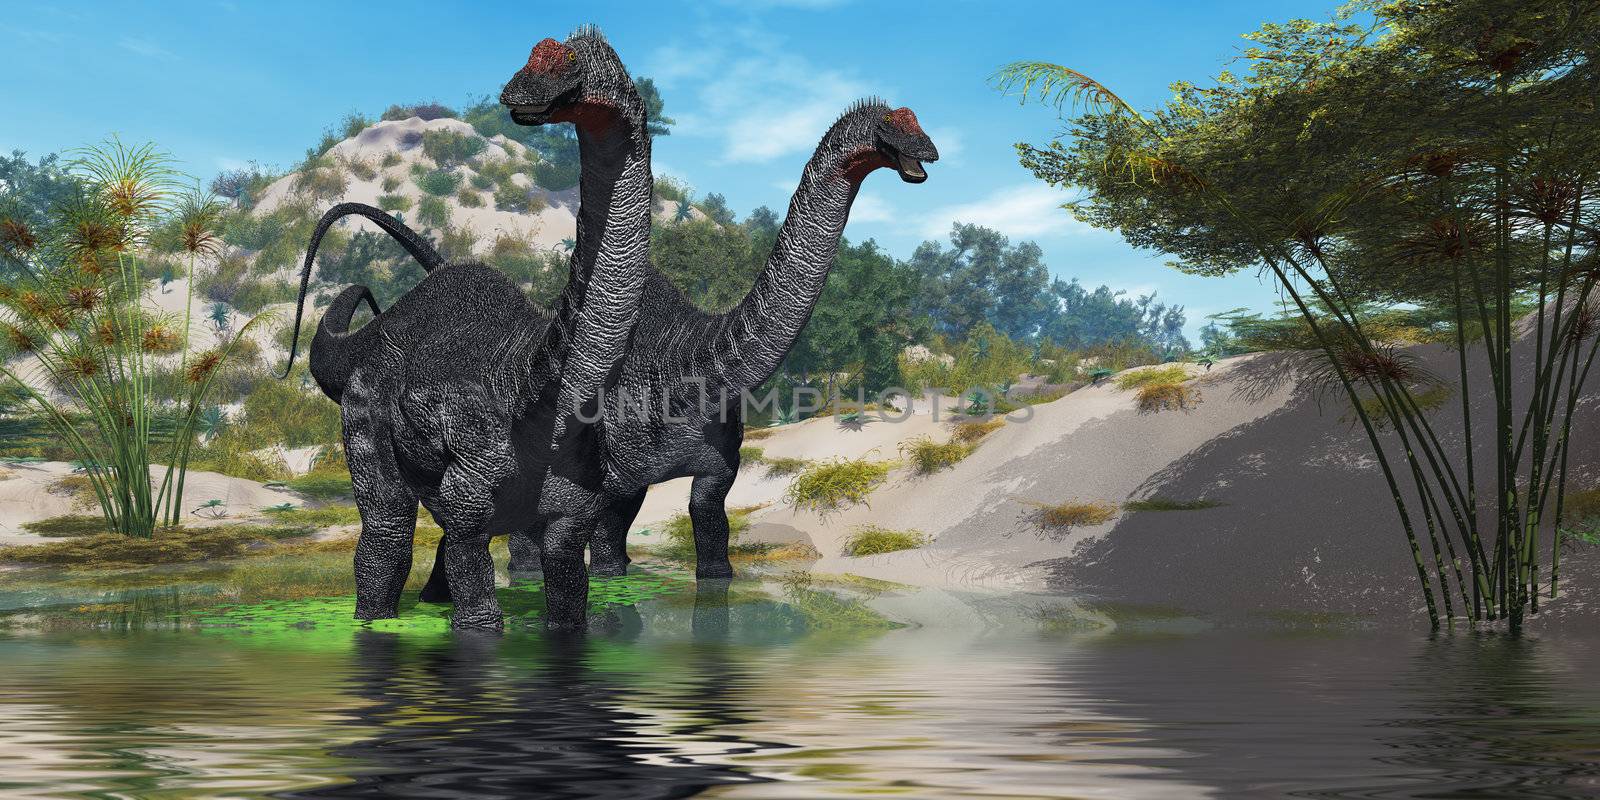 Two Apatasaurus dinosaur wade through a lush pond looking for plants to eat.